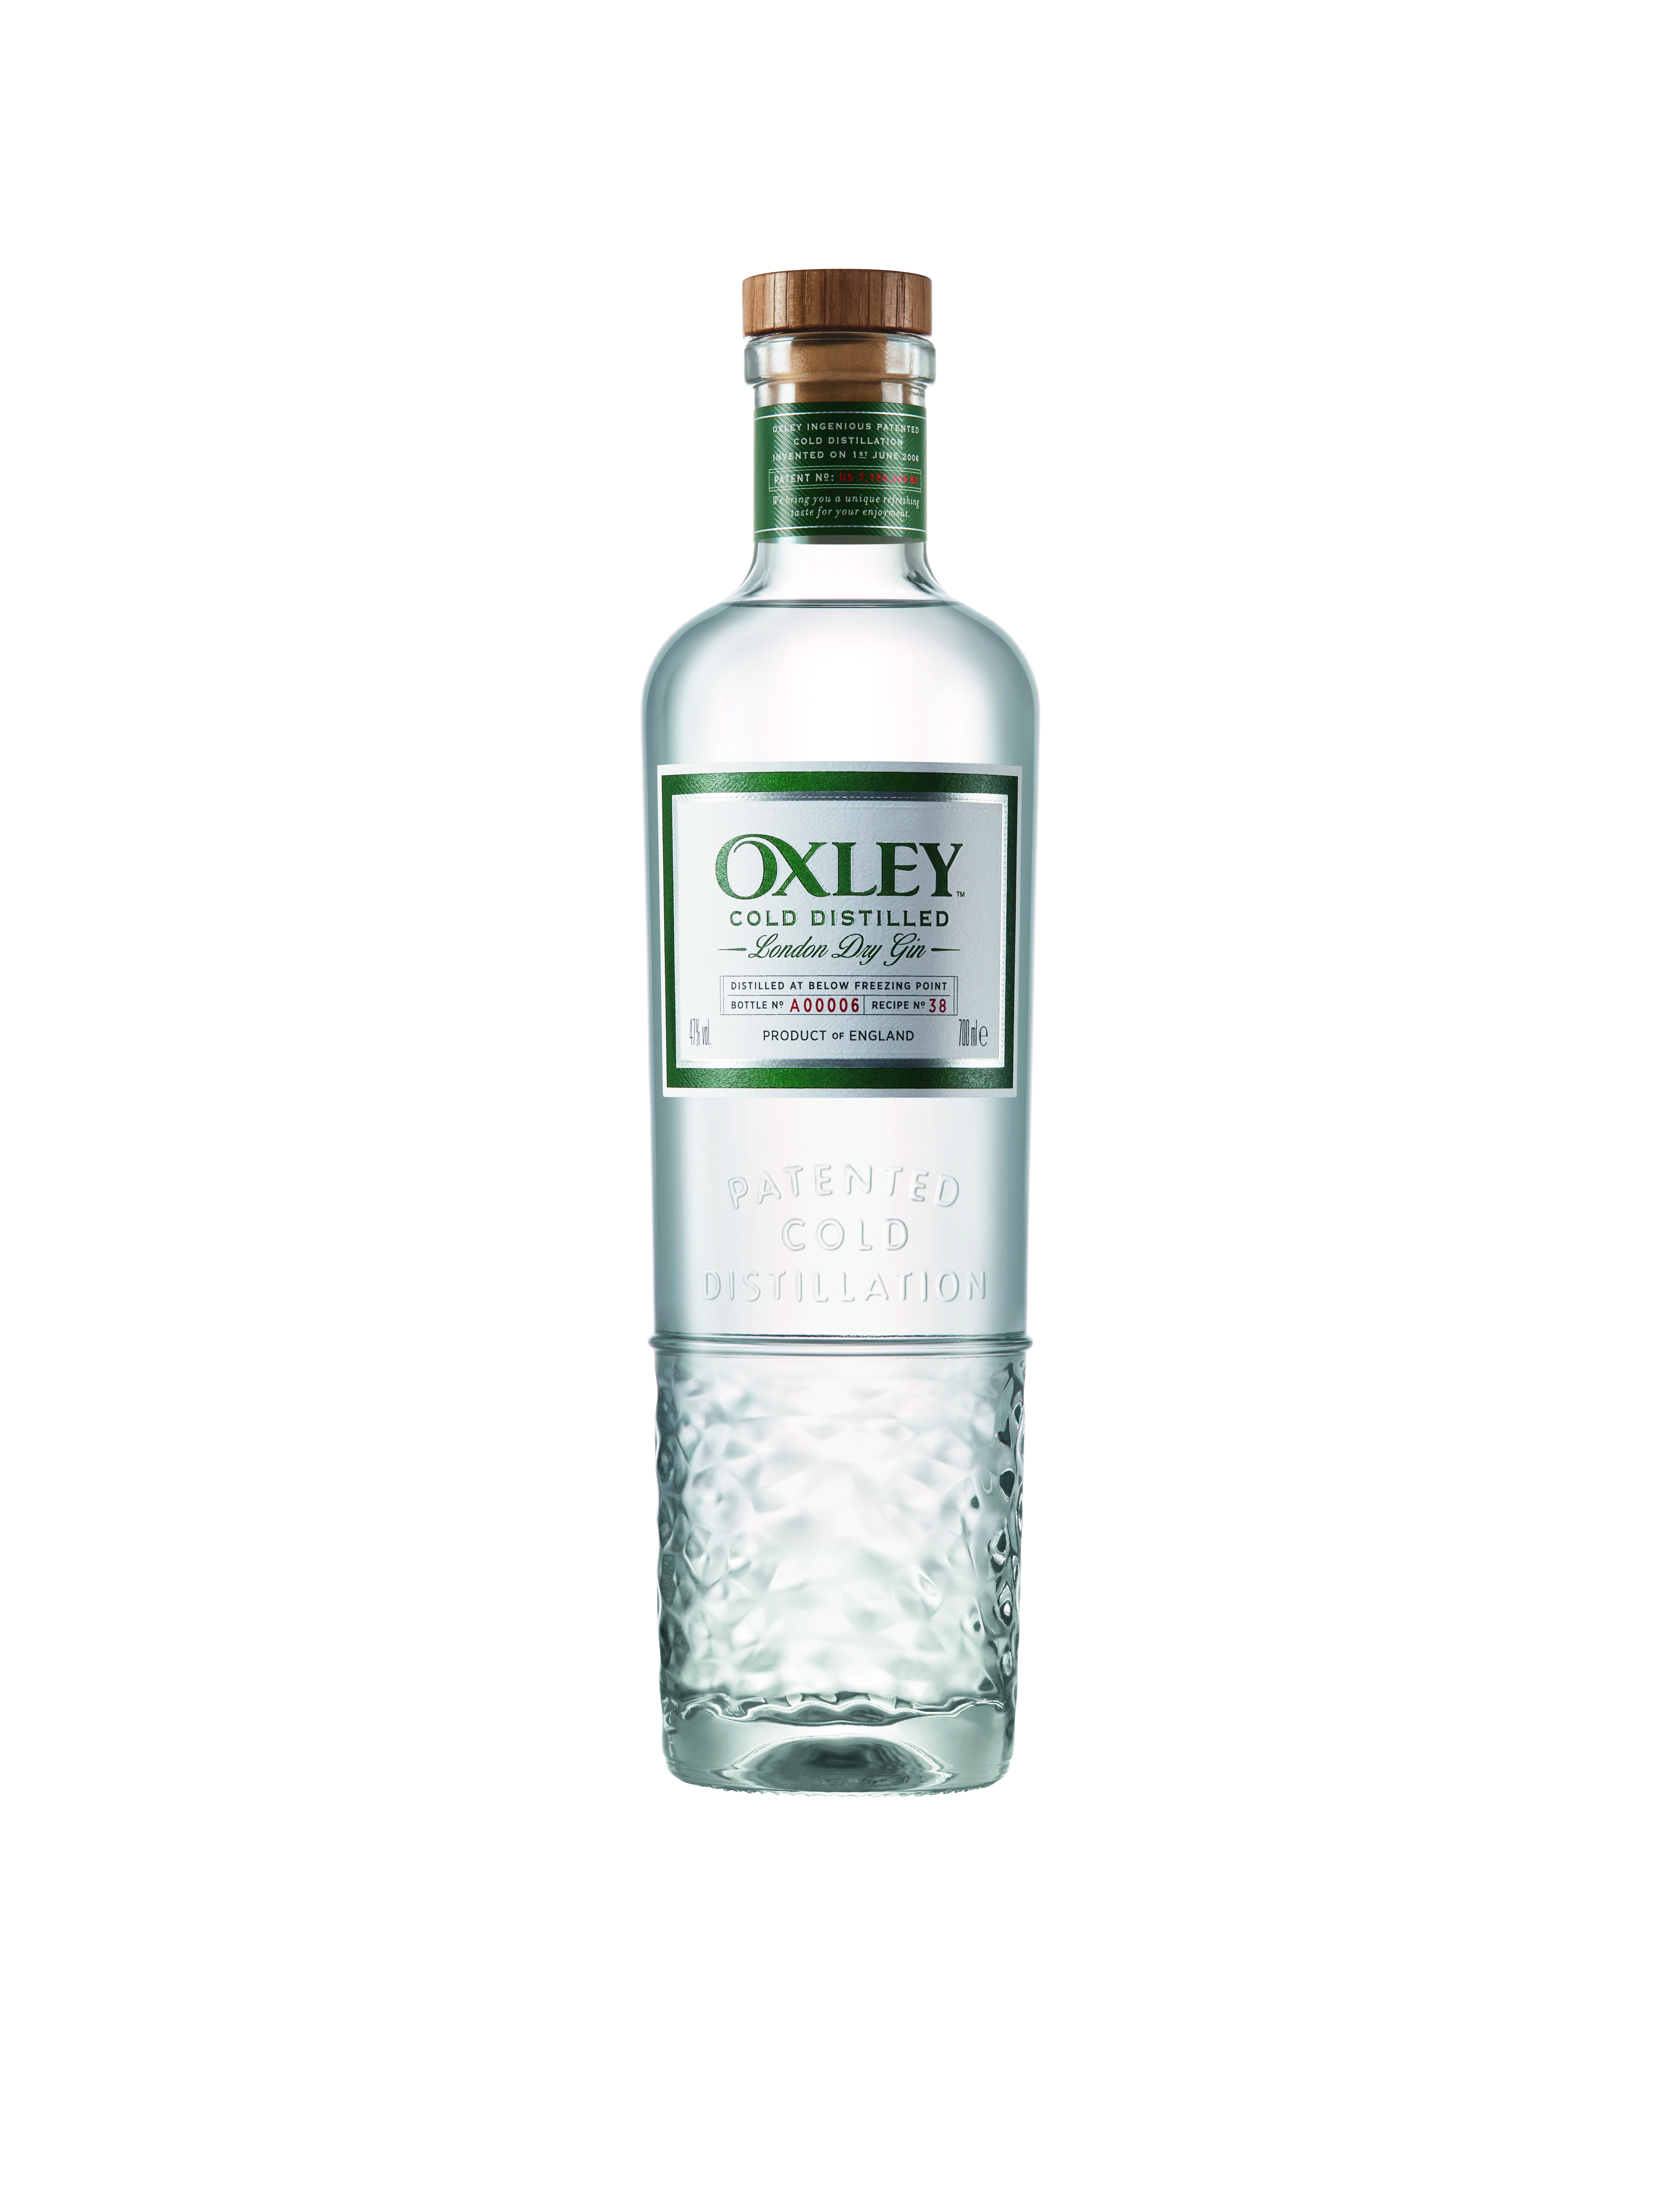 Oxley Cold Distilled London Dry Gin 47%vol. 0,7l